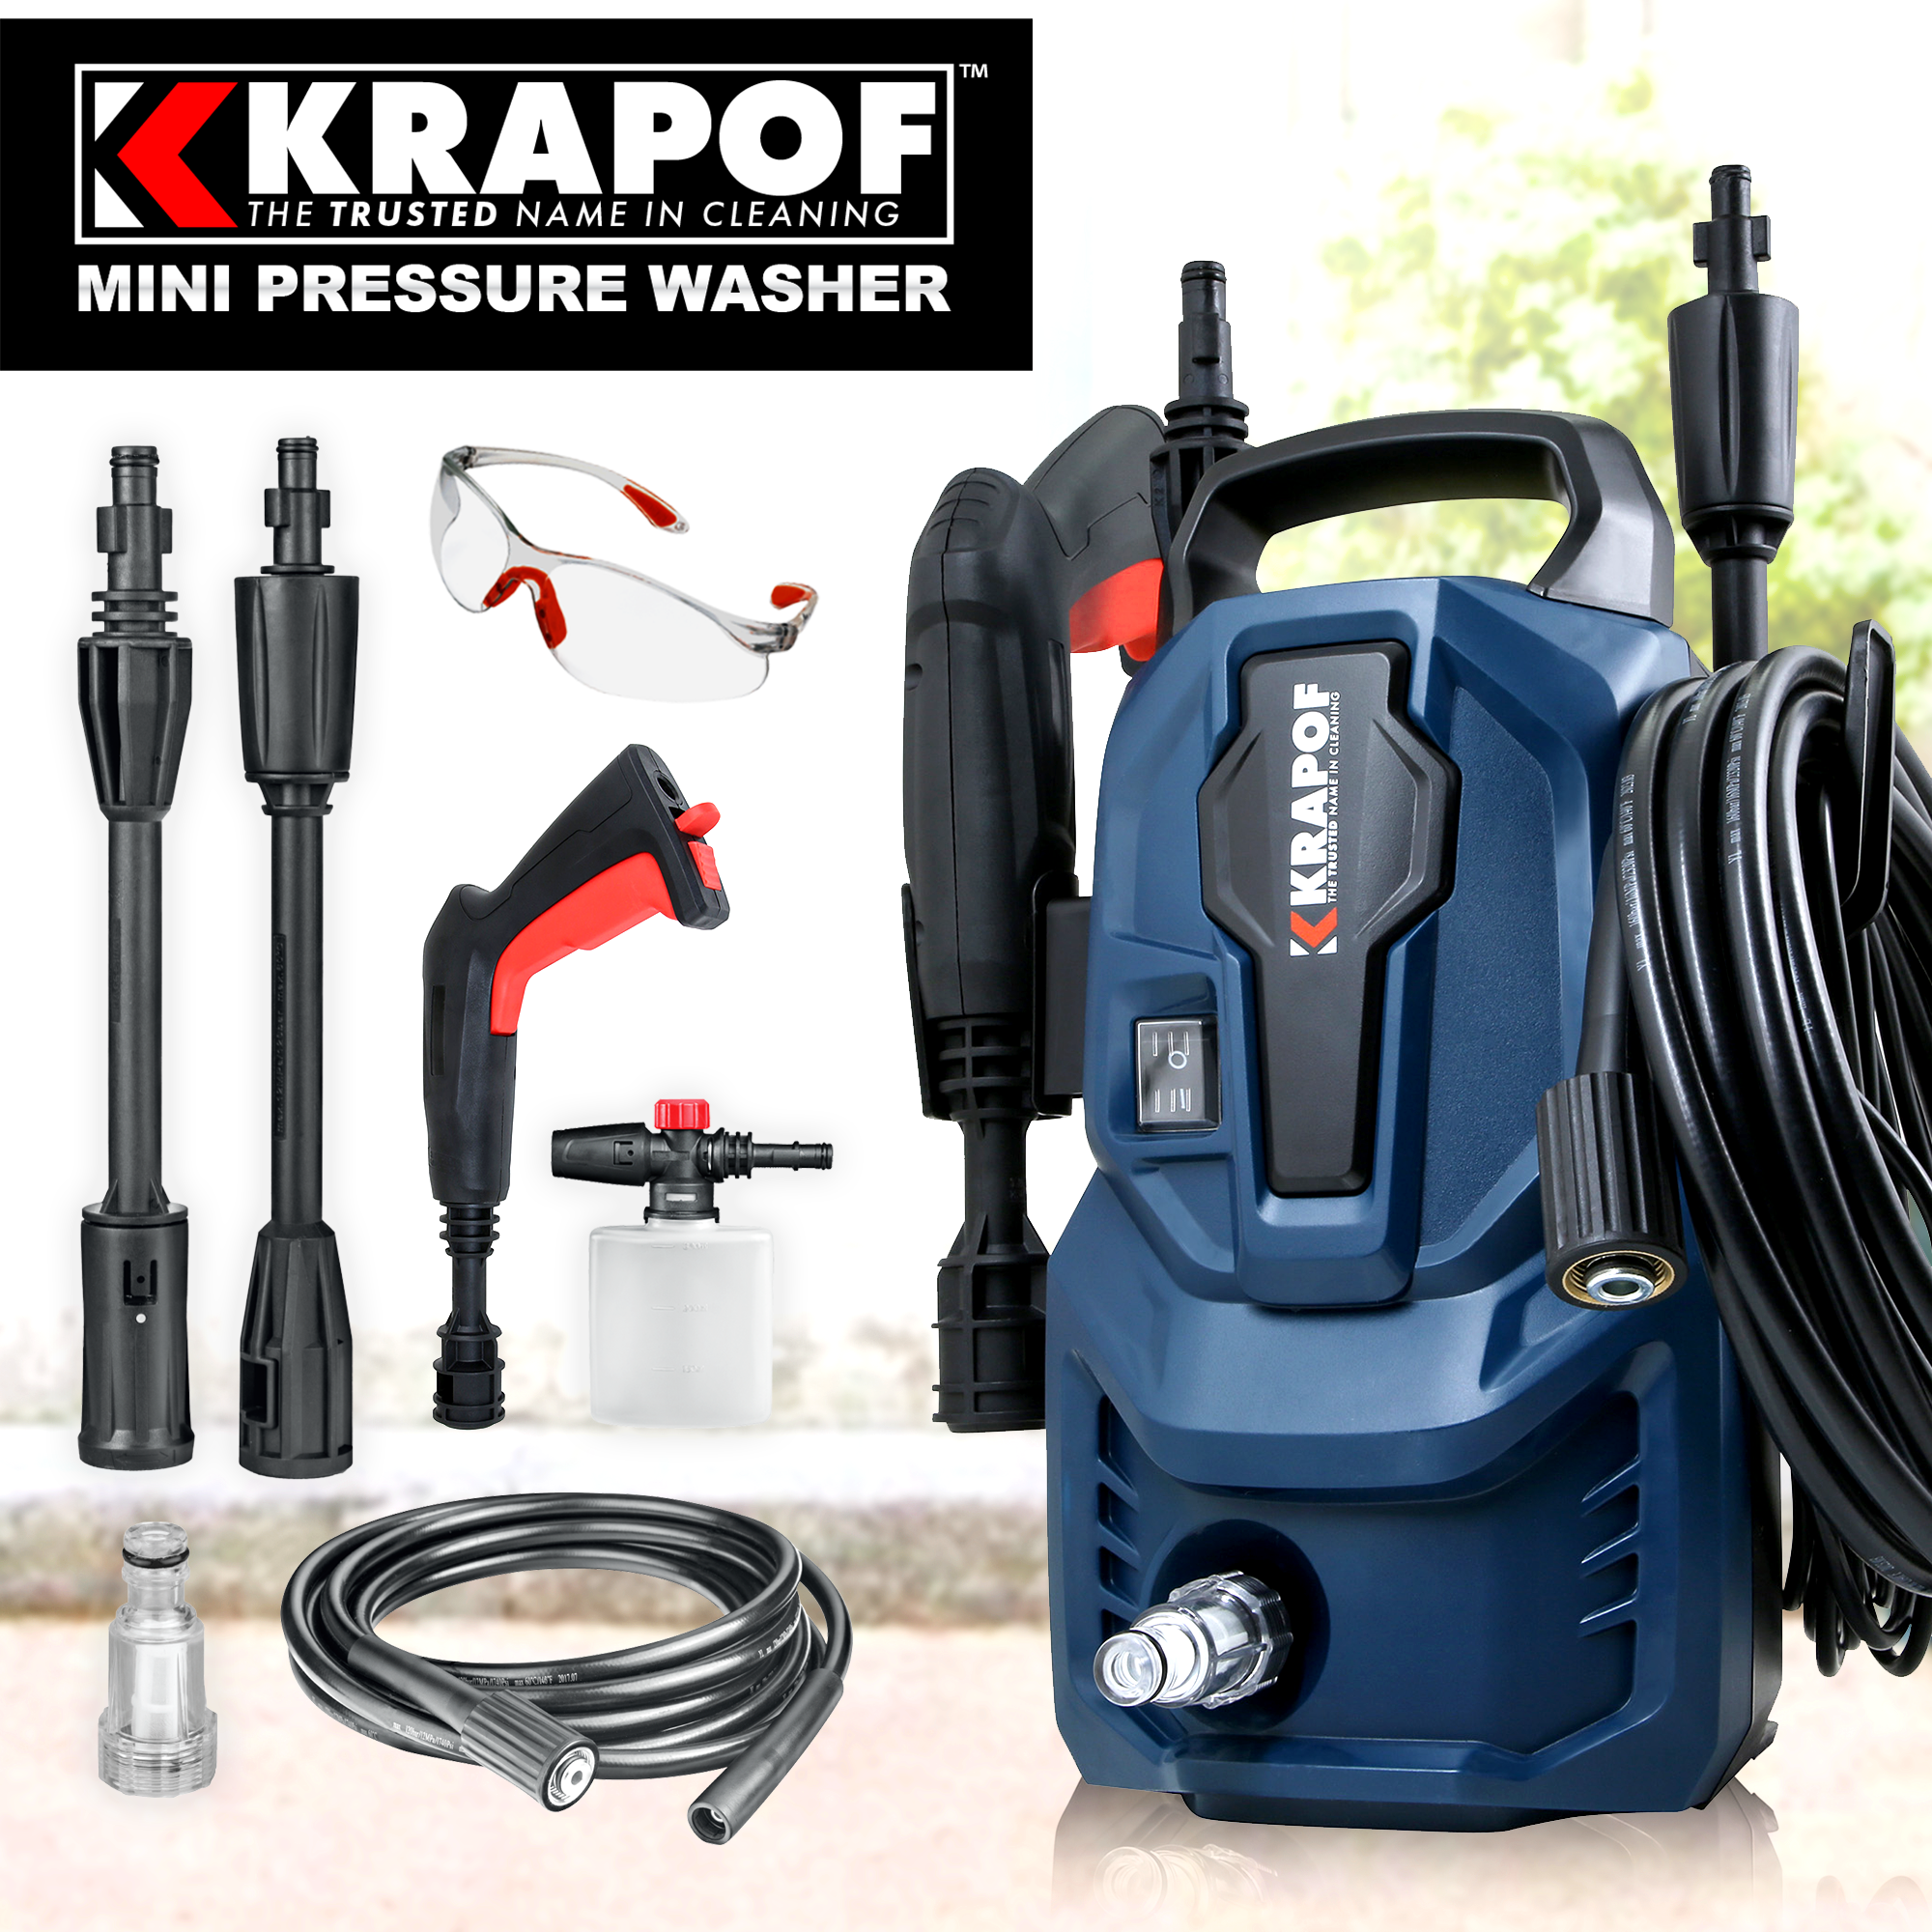 KRAPOF® Mini Electric Pressure Washer -Suitable for any Household or Apartment